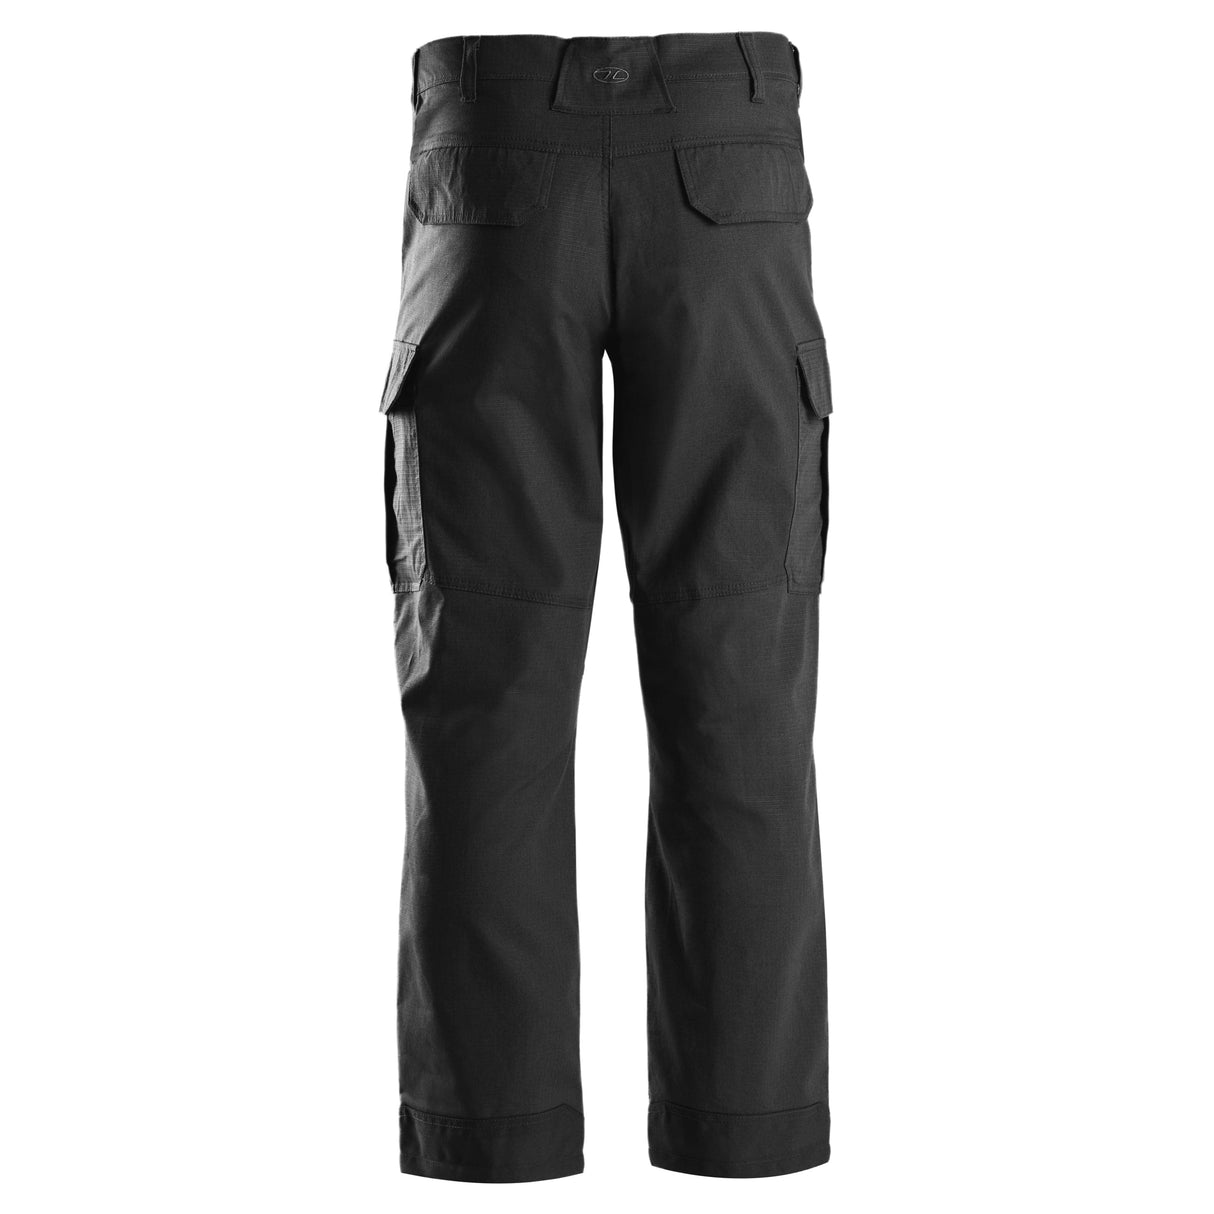 STOIRM Trousers STOIRM Tactical Trousers Black